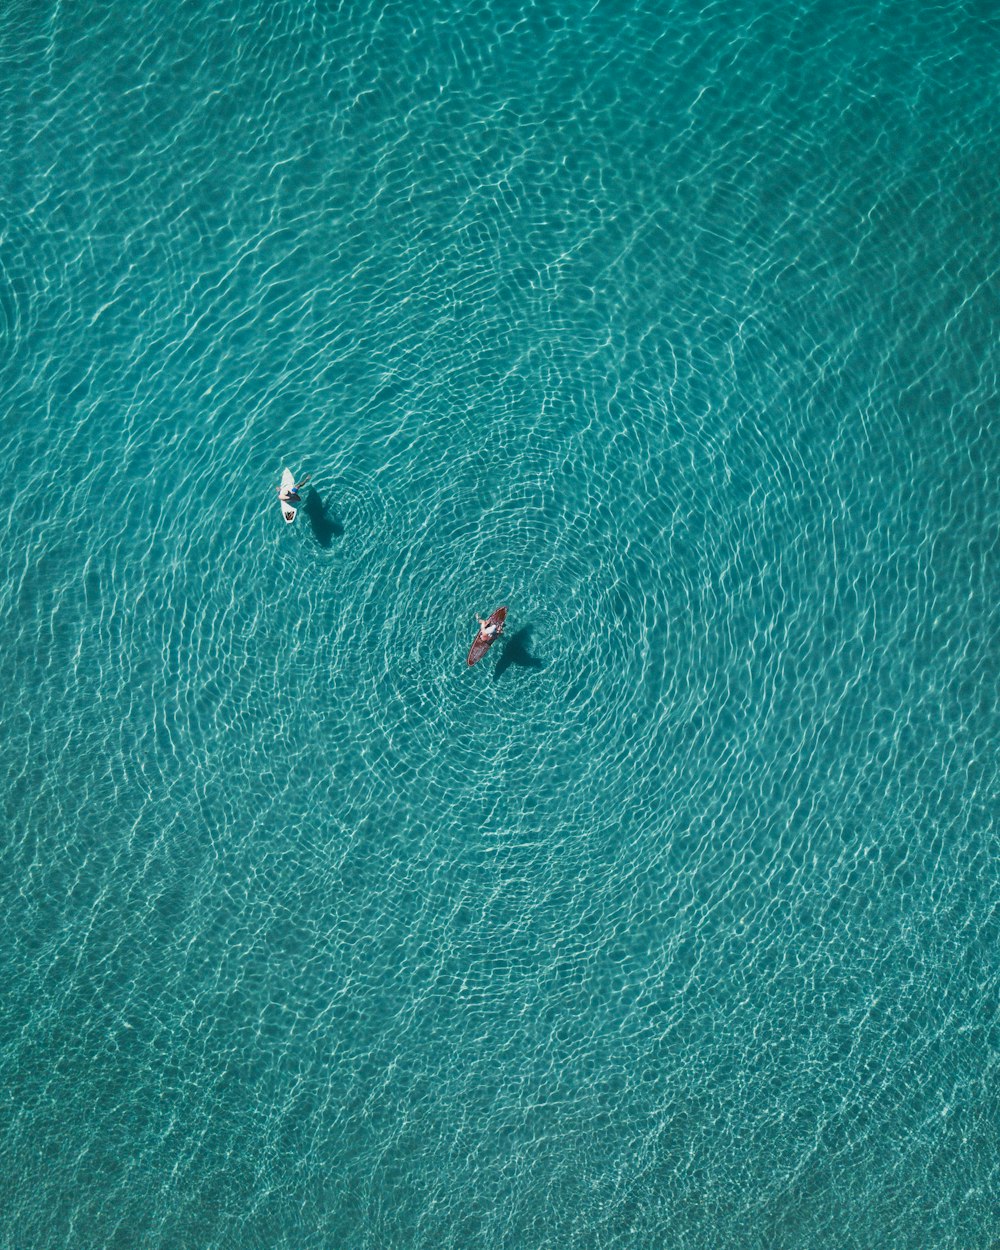 two people are swimming in the ocean together